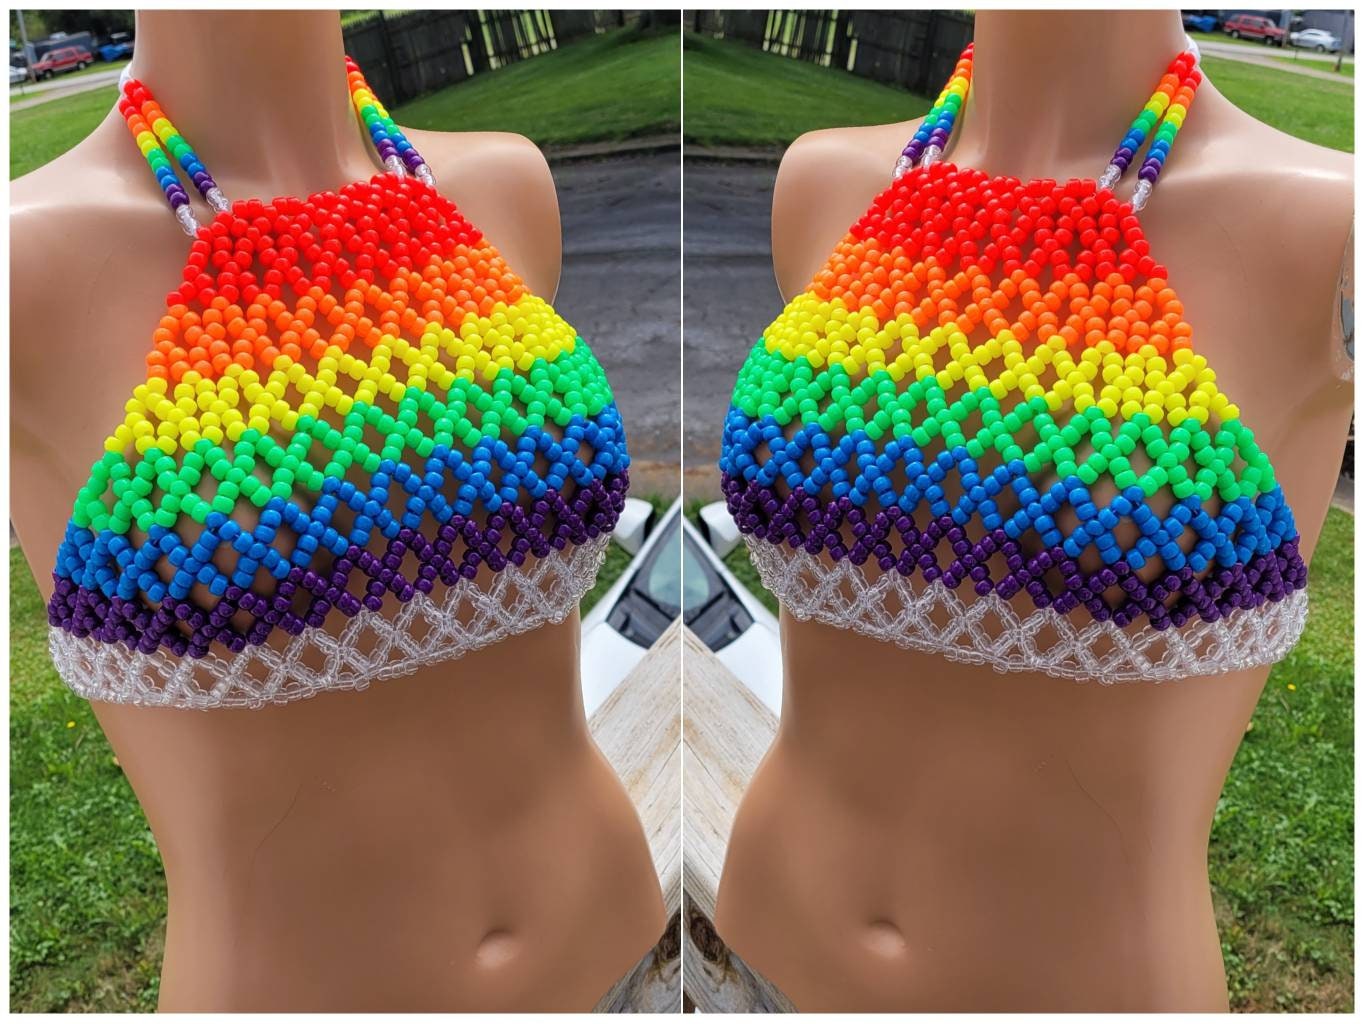 Candy Bra,kandi Top,rave Outfit, Edc Outfit, Pride Outfit,rave Bra,rave  Top,festival Top,festival Outfit,pride Bra,rave Clothing,candy Top -   Ireland